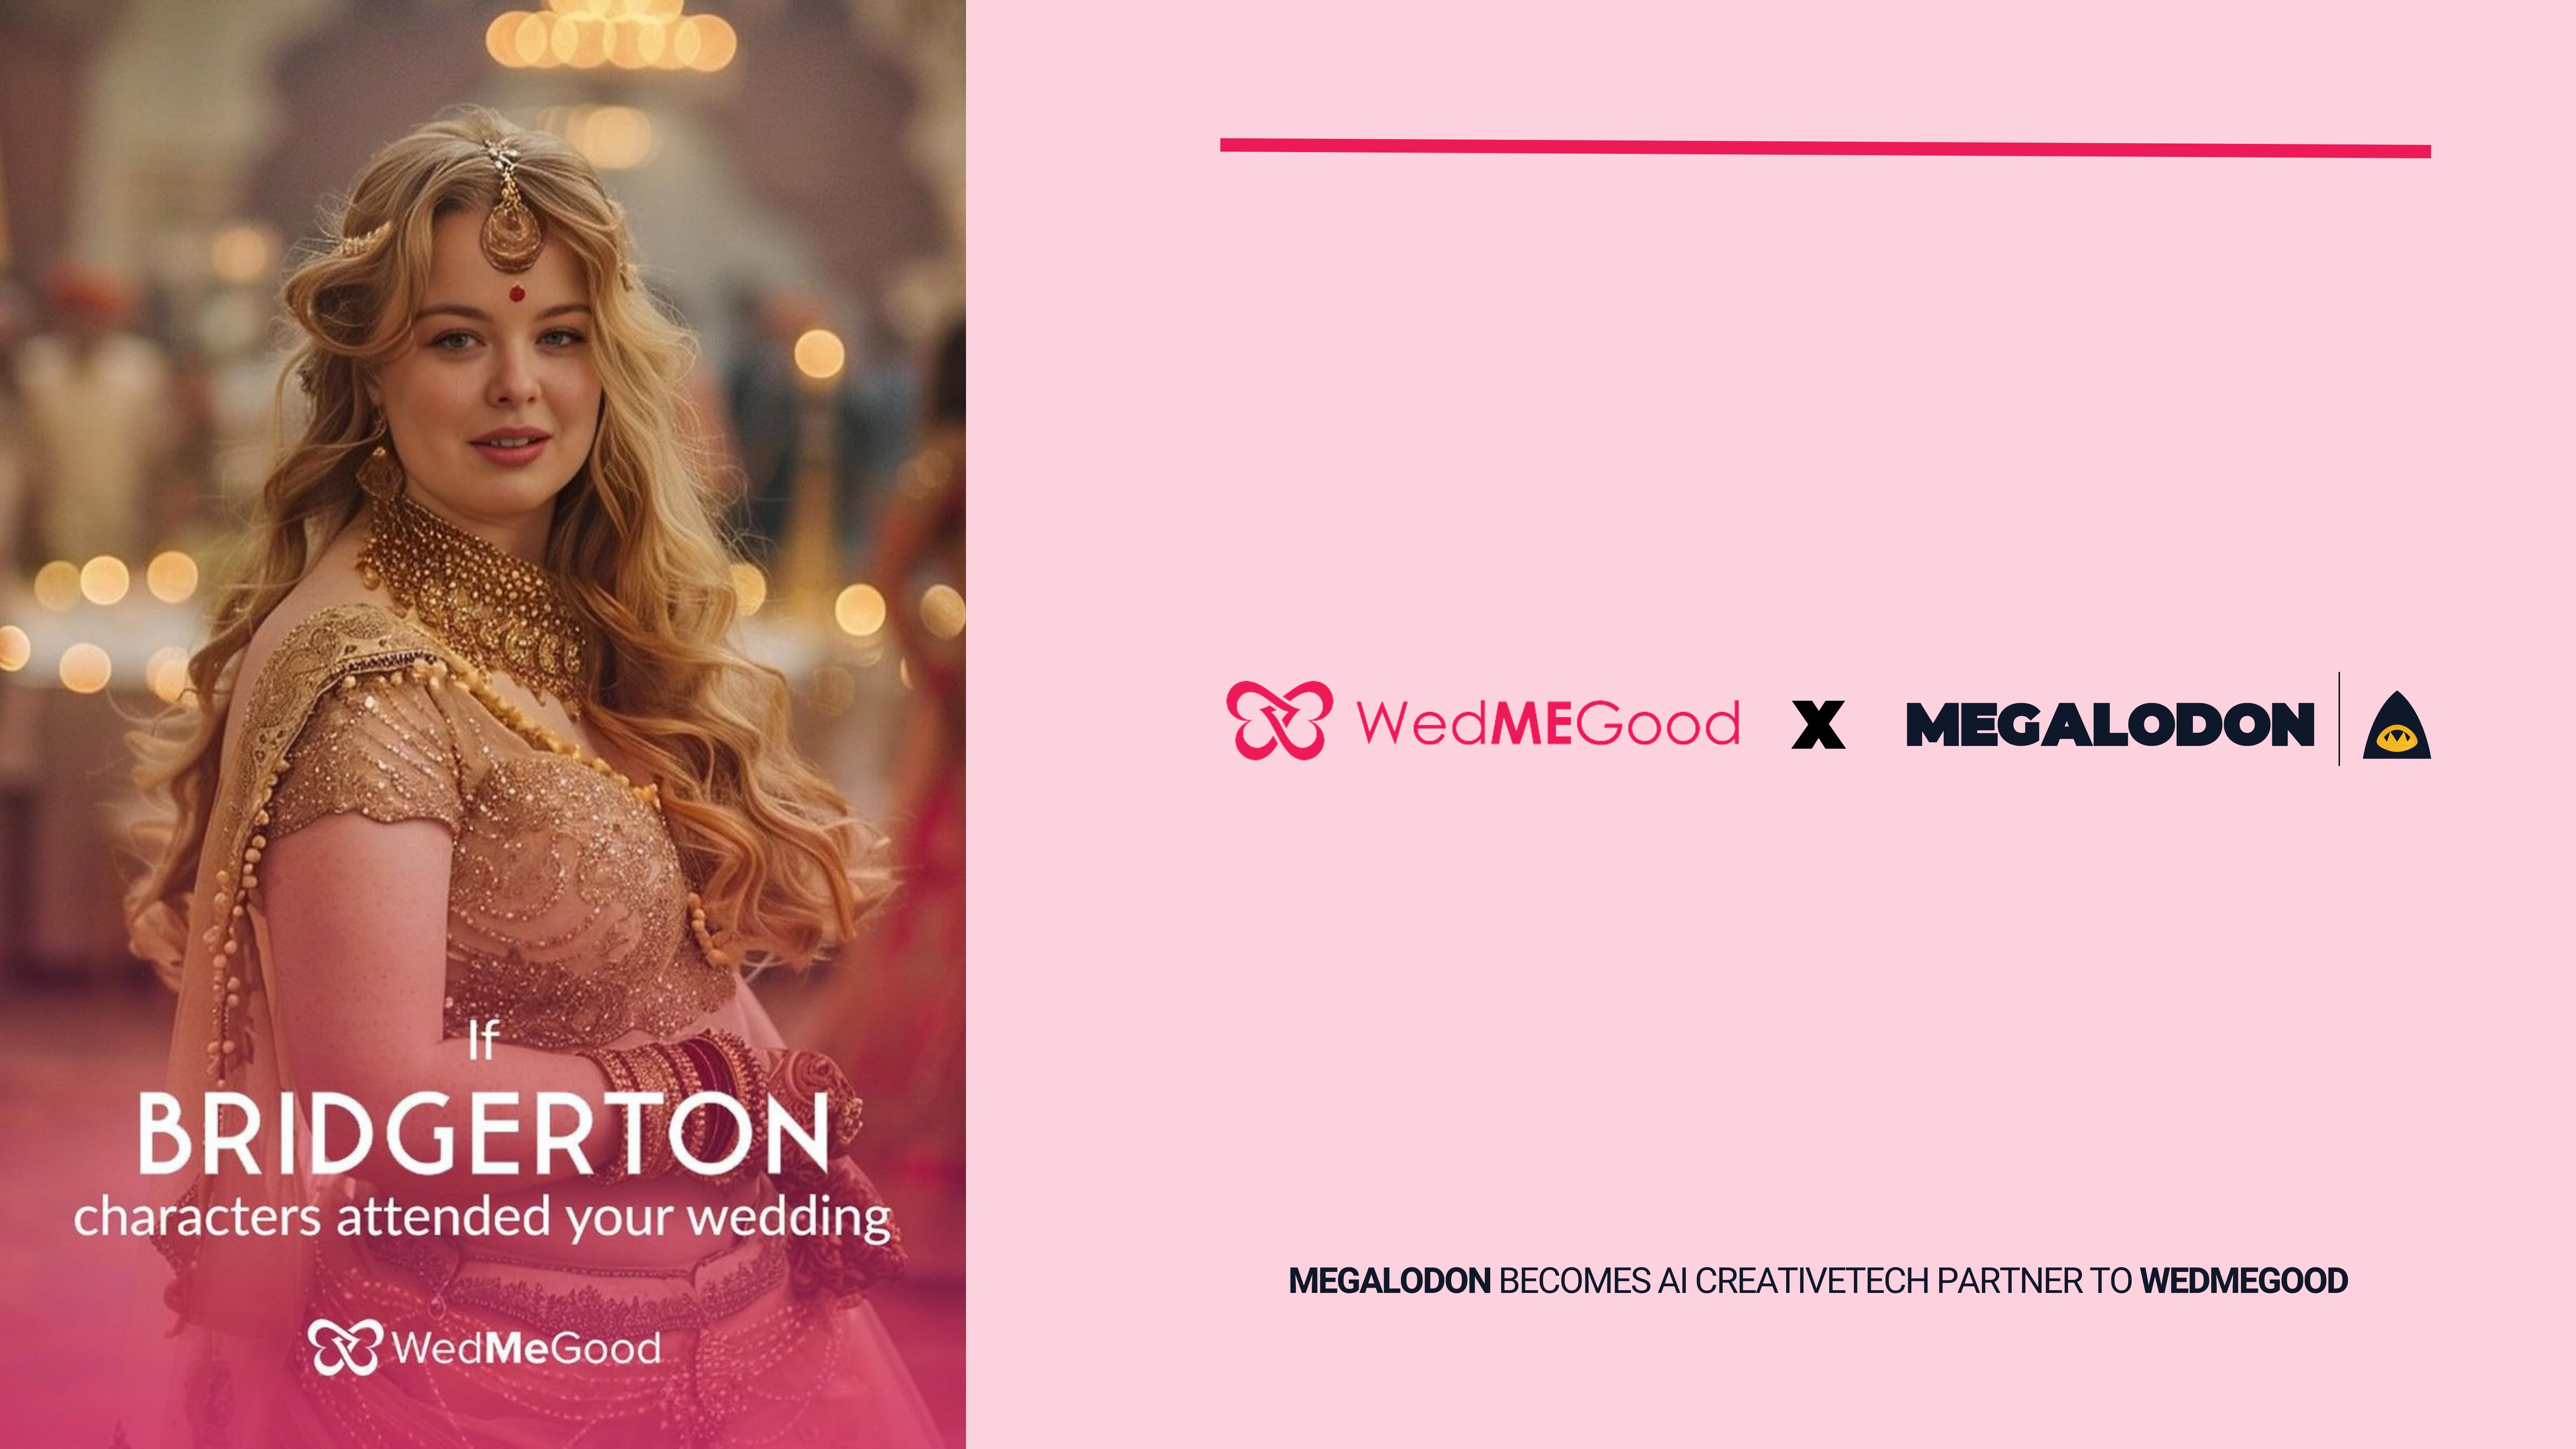 Wed Me Good Appoints Megalodon as AI Creative Tech Partner